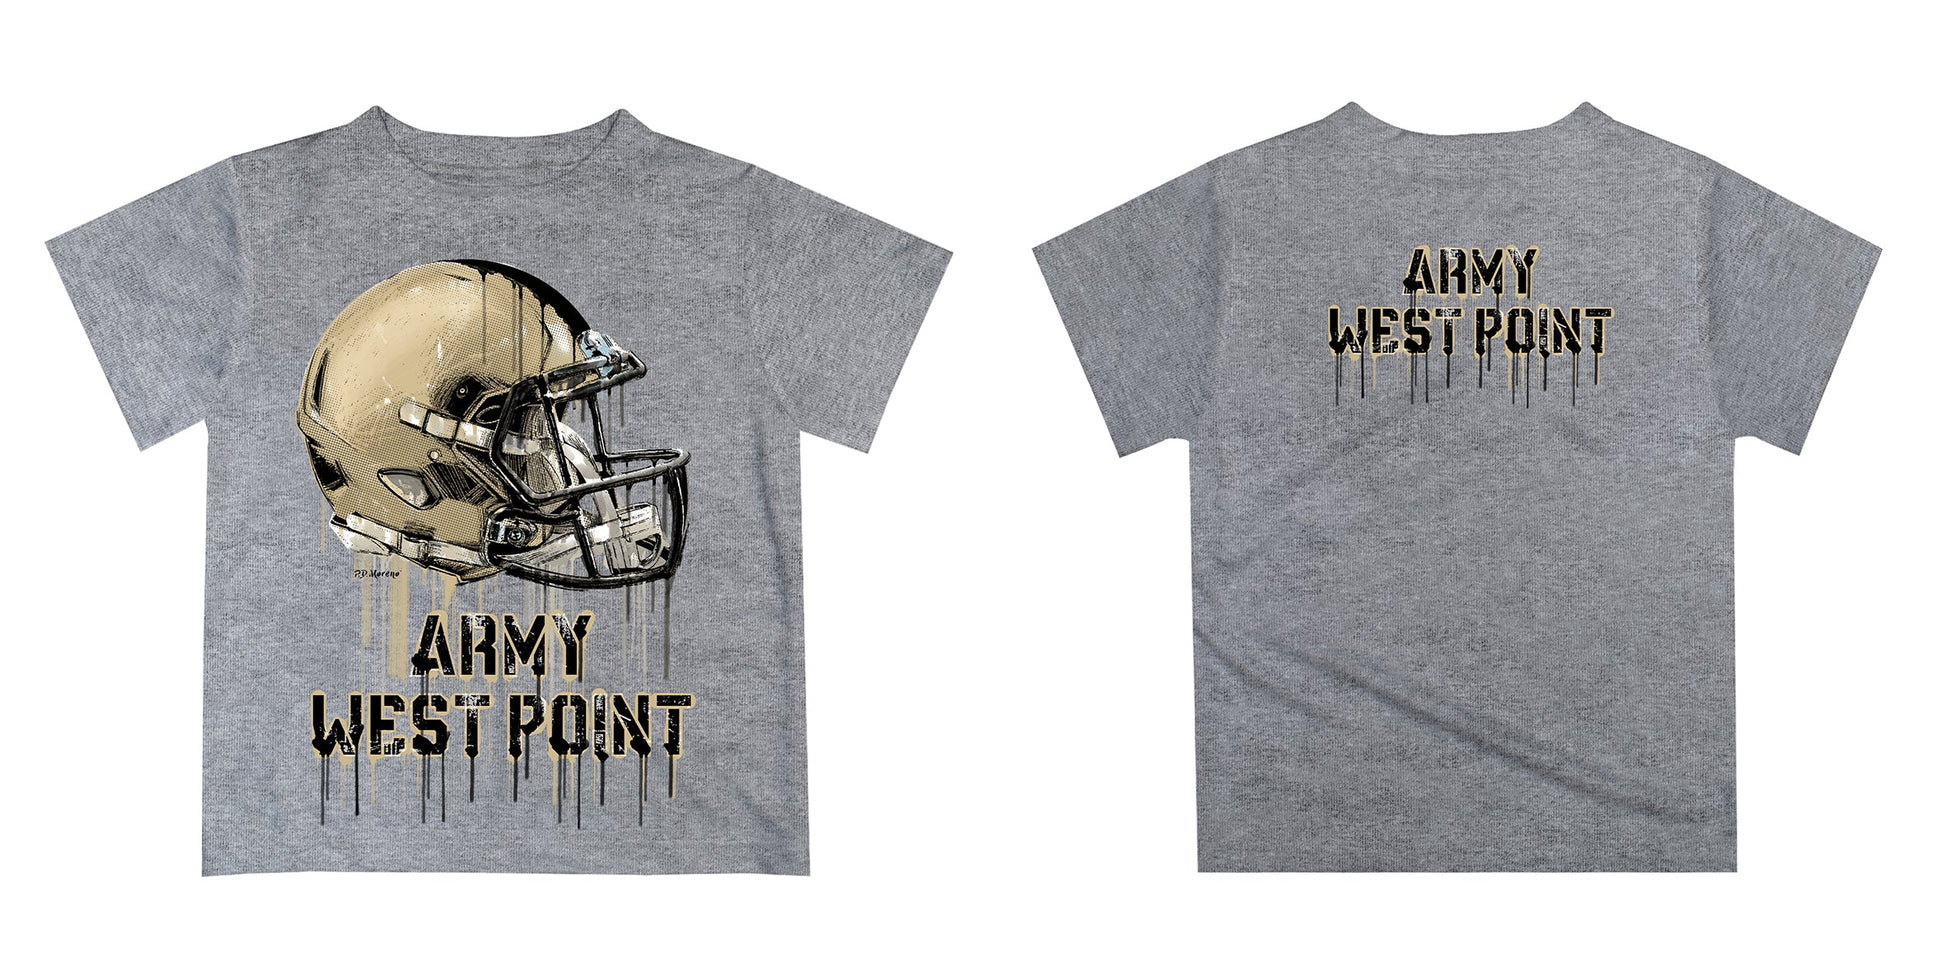 Army West Point Black Knights Original Dripping Football Helmet Heather Gray T-Shirt by Vive La Fete